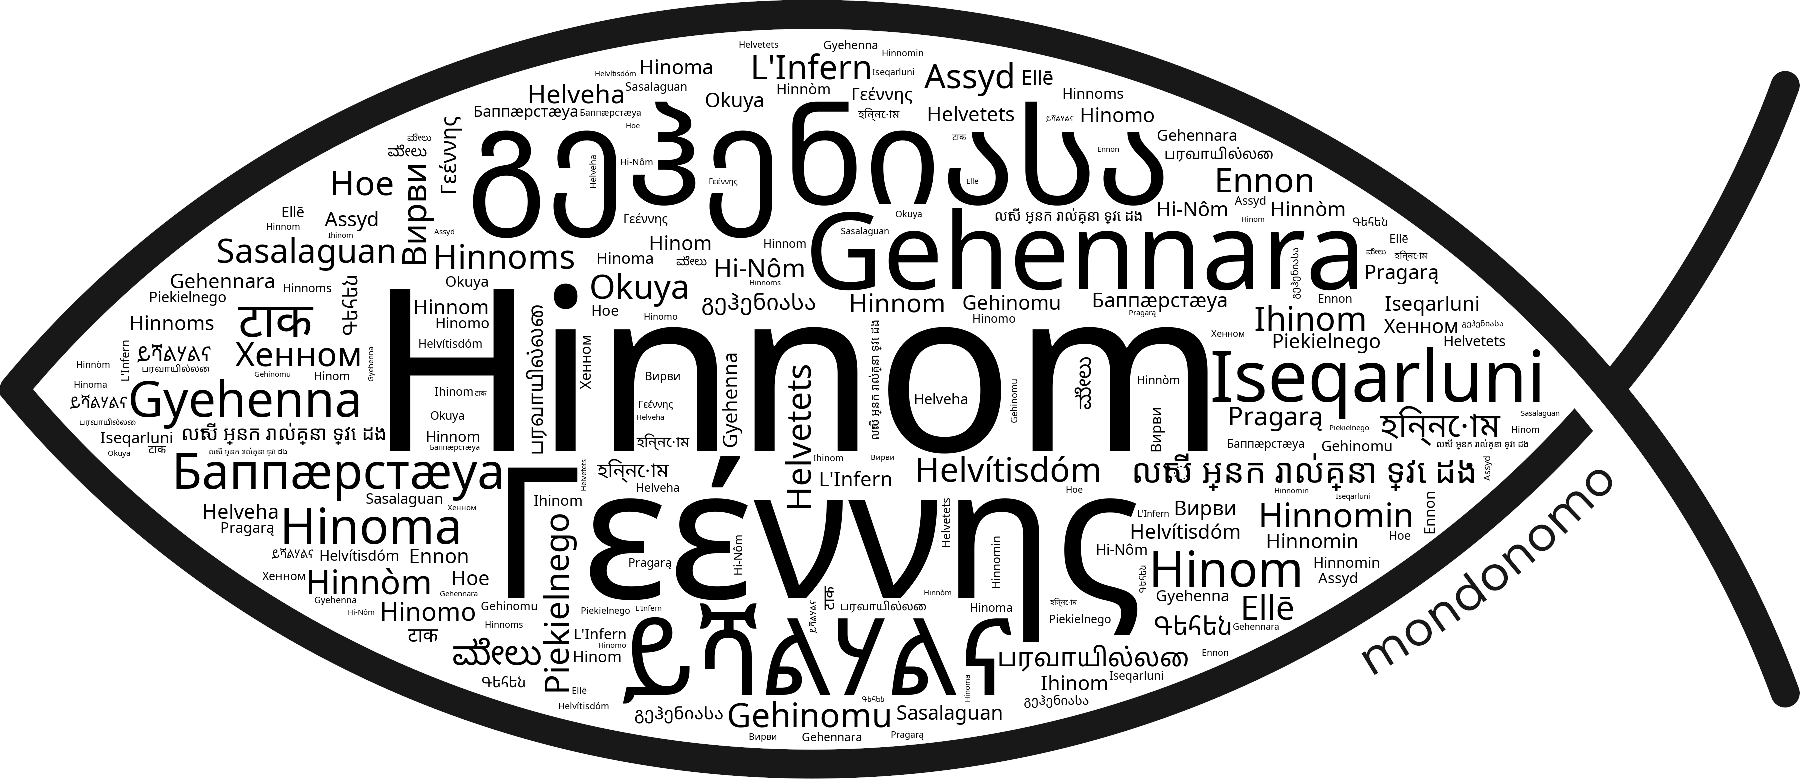 Name Hinnom in the world's Bibles